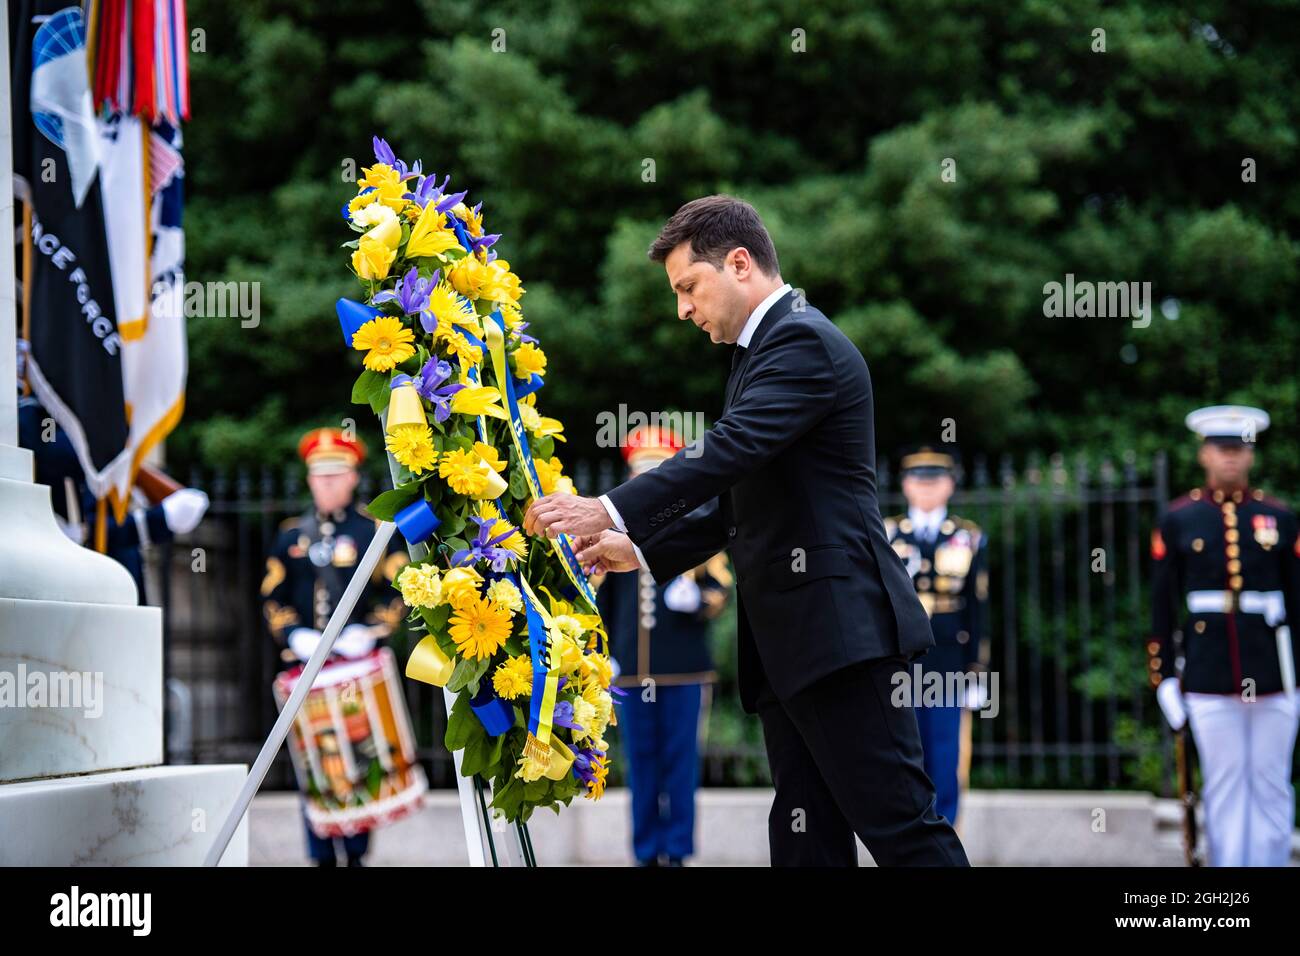 Ukrainian President Volodymyr Zelenskyy places a wreath at the Tomb of the Unknown Soldier at Arlington National Cemetery September 1, 2021 in Arlington, Virginia. Stock Photo